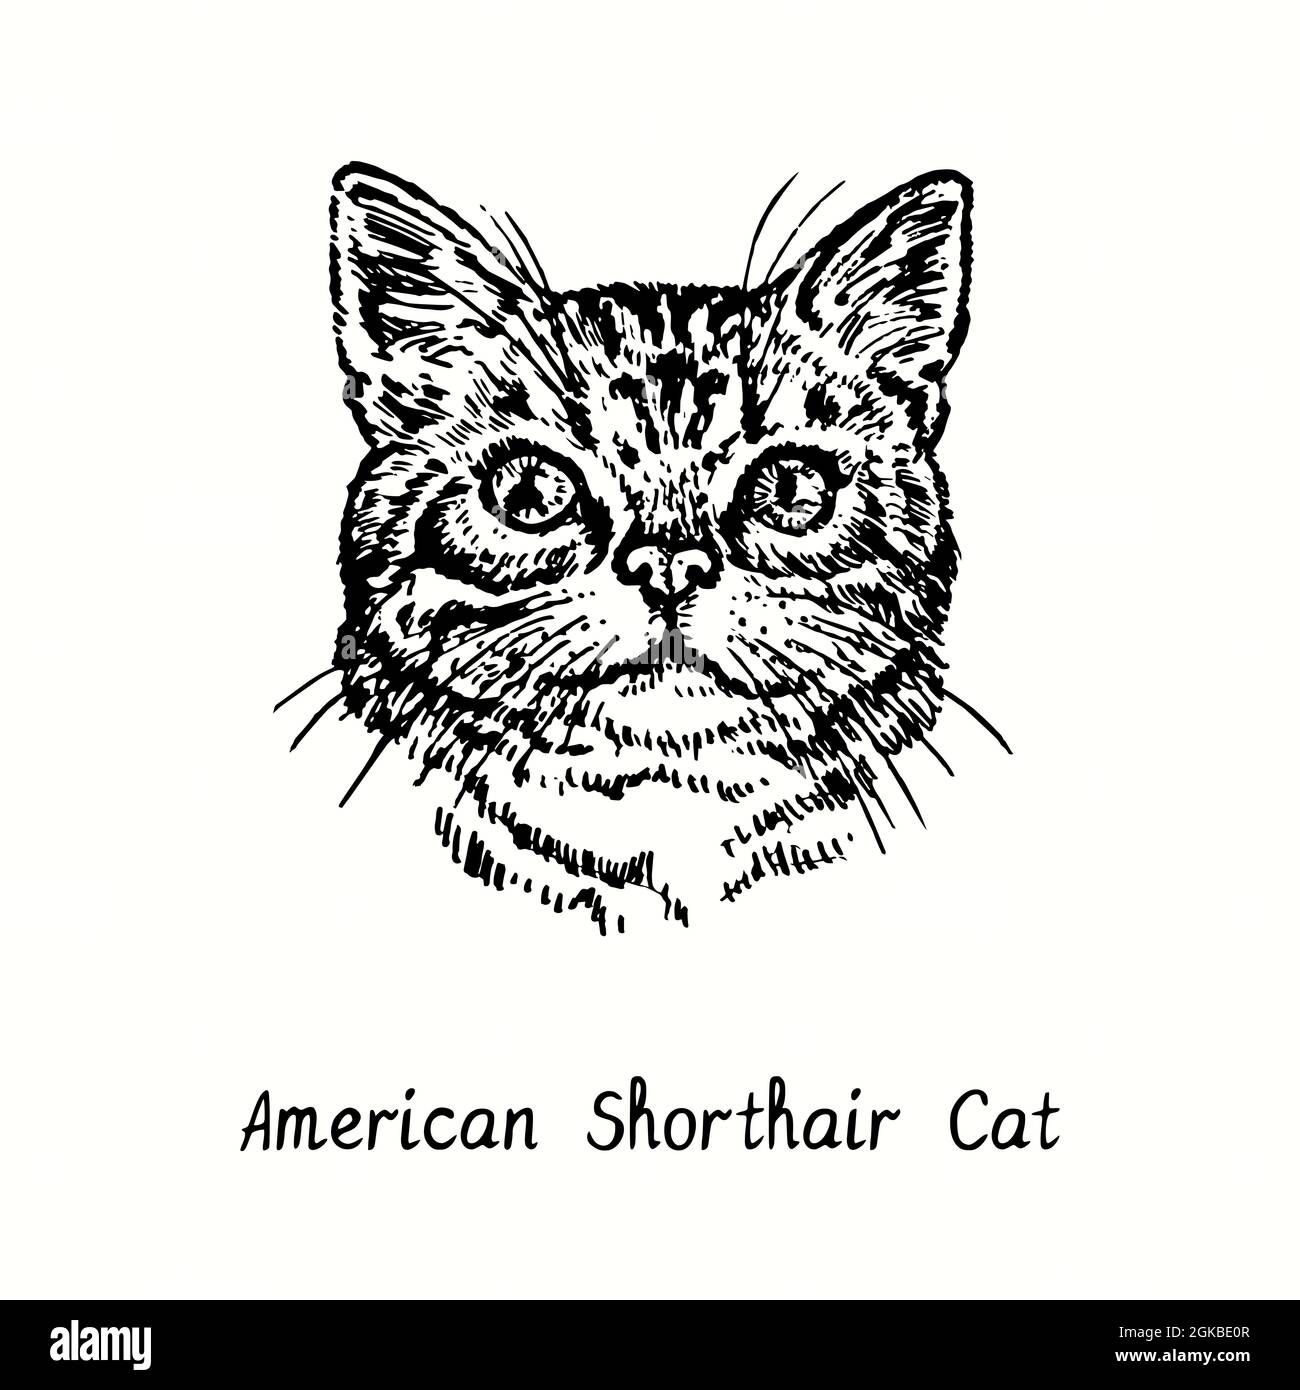 American Shorthair Cat face portrait. Ink black and white doodle drawing in woodcut style. Stock Photo